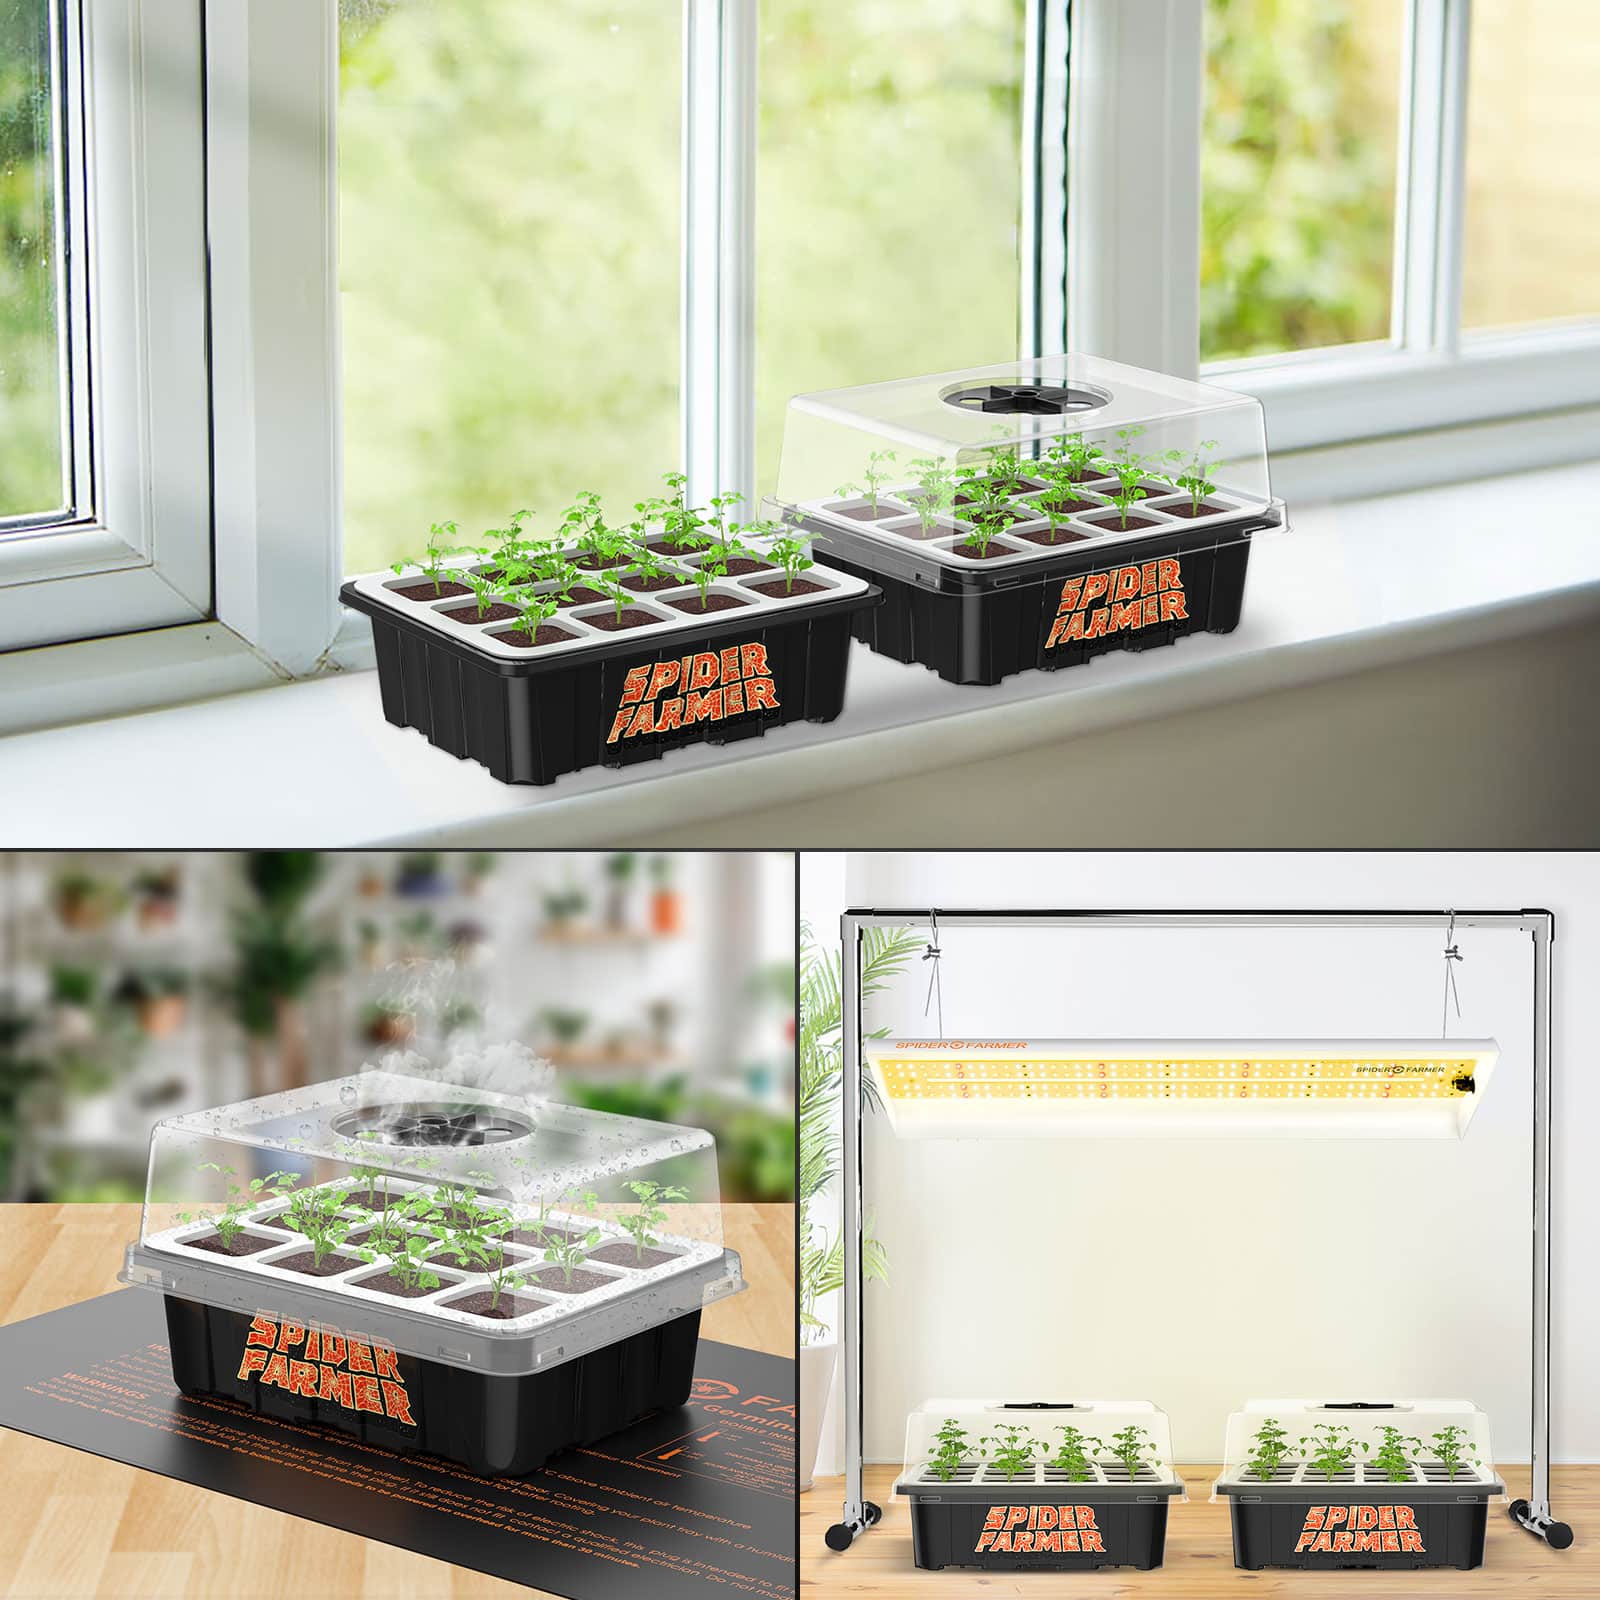 Spider Farmer® Seed Starting Trays 2 Pack